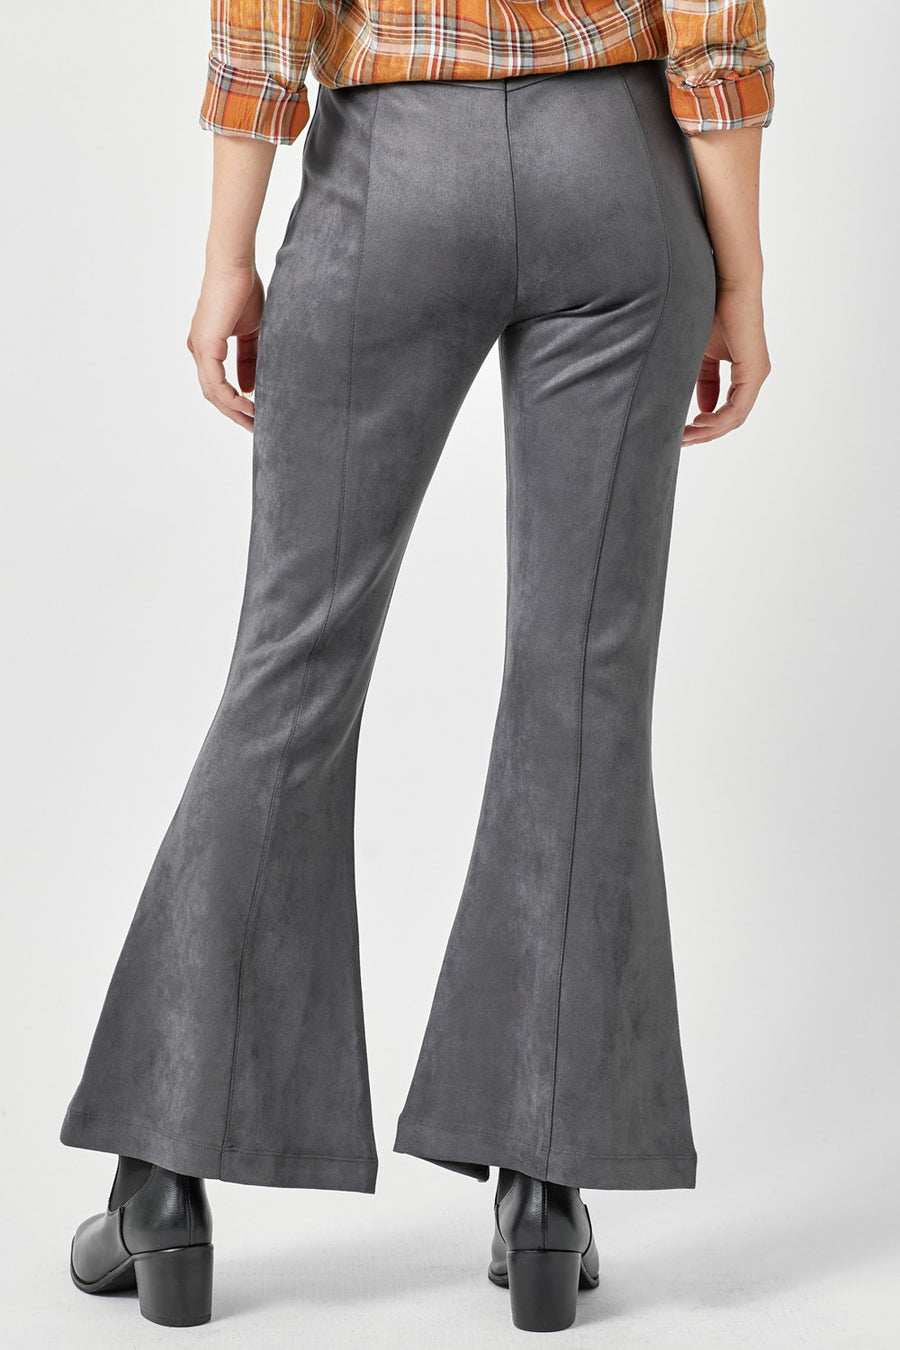 Front Slit Suede Flare Pants - Charcoal